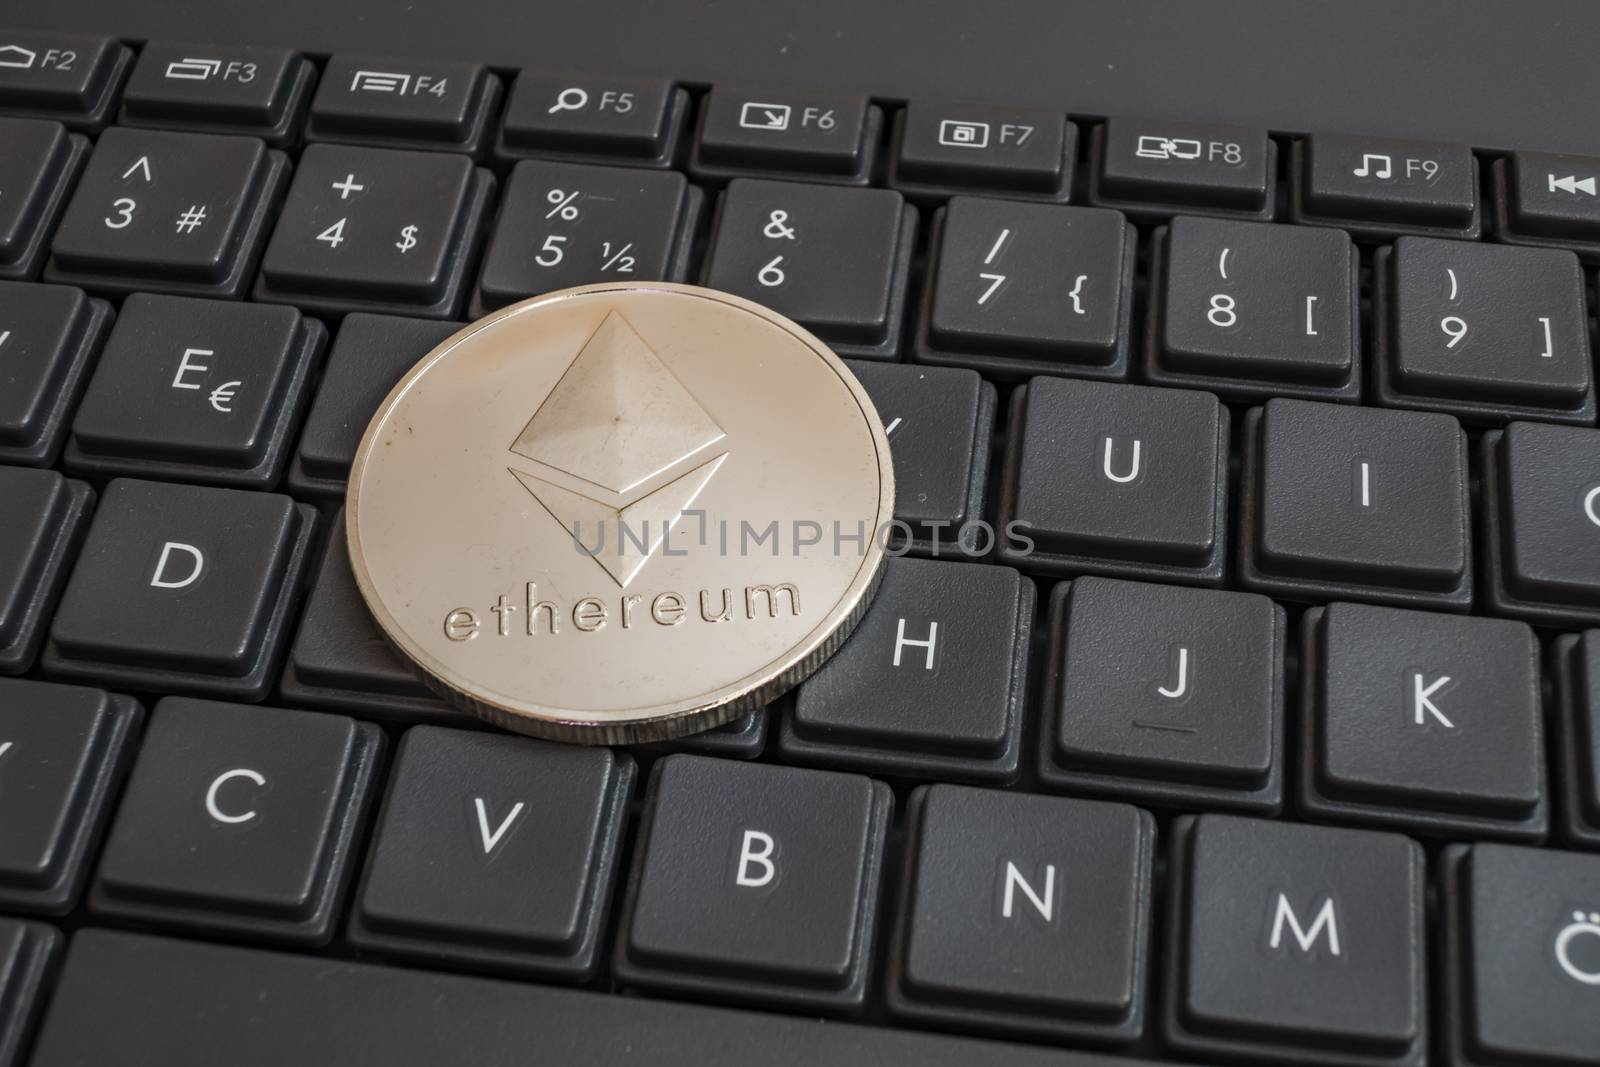 close up cryptocurrency coins on keyboard background